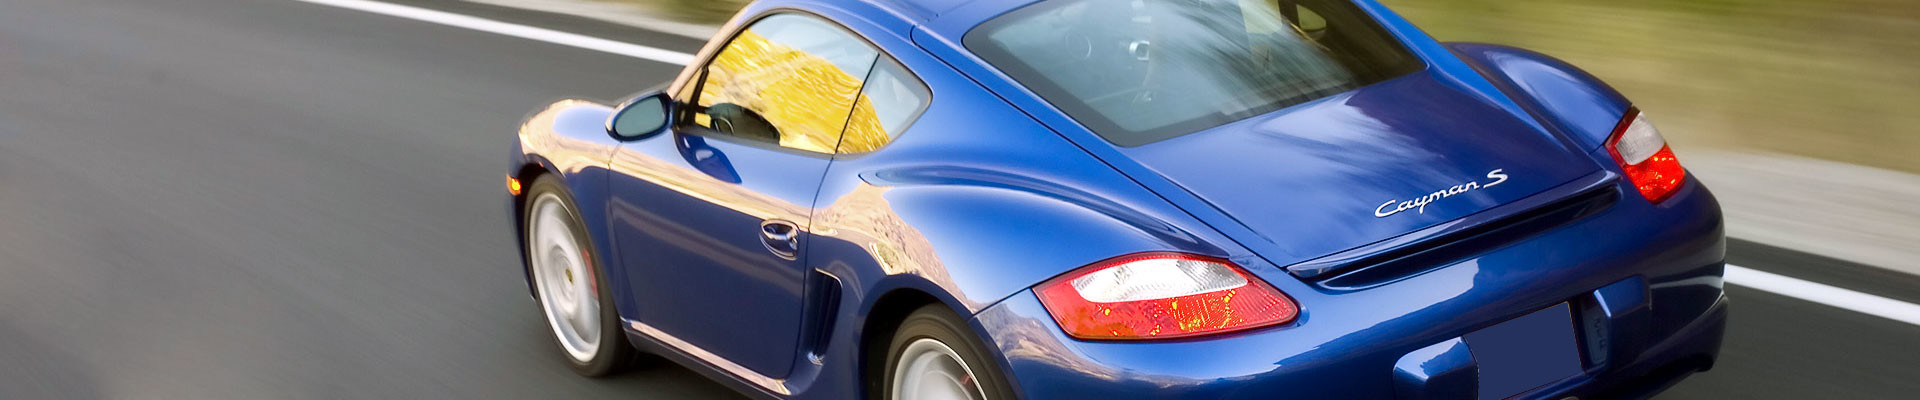 Porsche Cayman 987 maintenance or service schedule with details of the time and mileage intervals and service or maintenance items to replace. We include the Porsche maintenance schedule and some additional recommended maintenance intervals for your 987 Cayman.